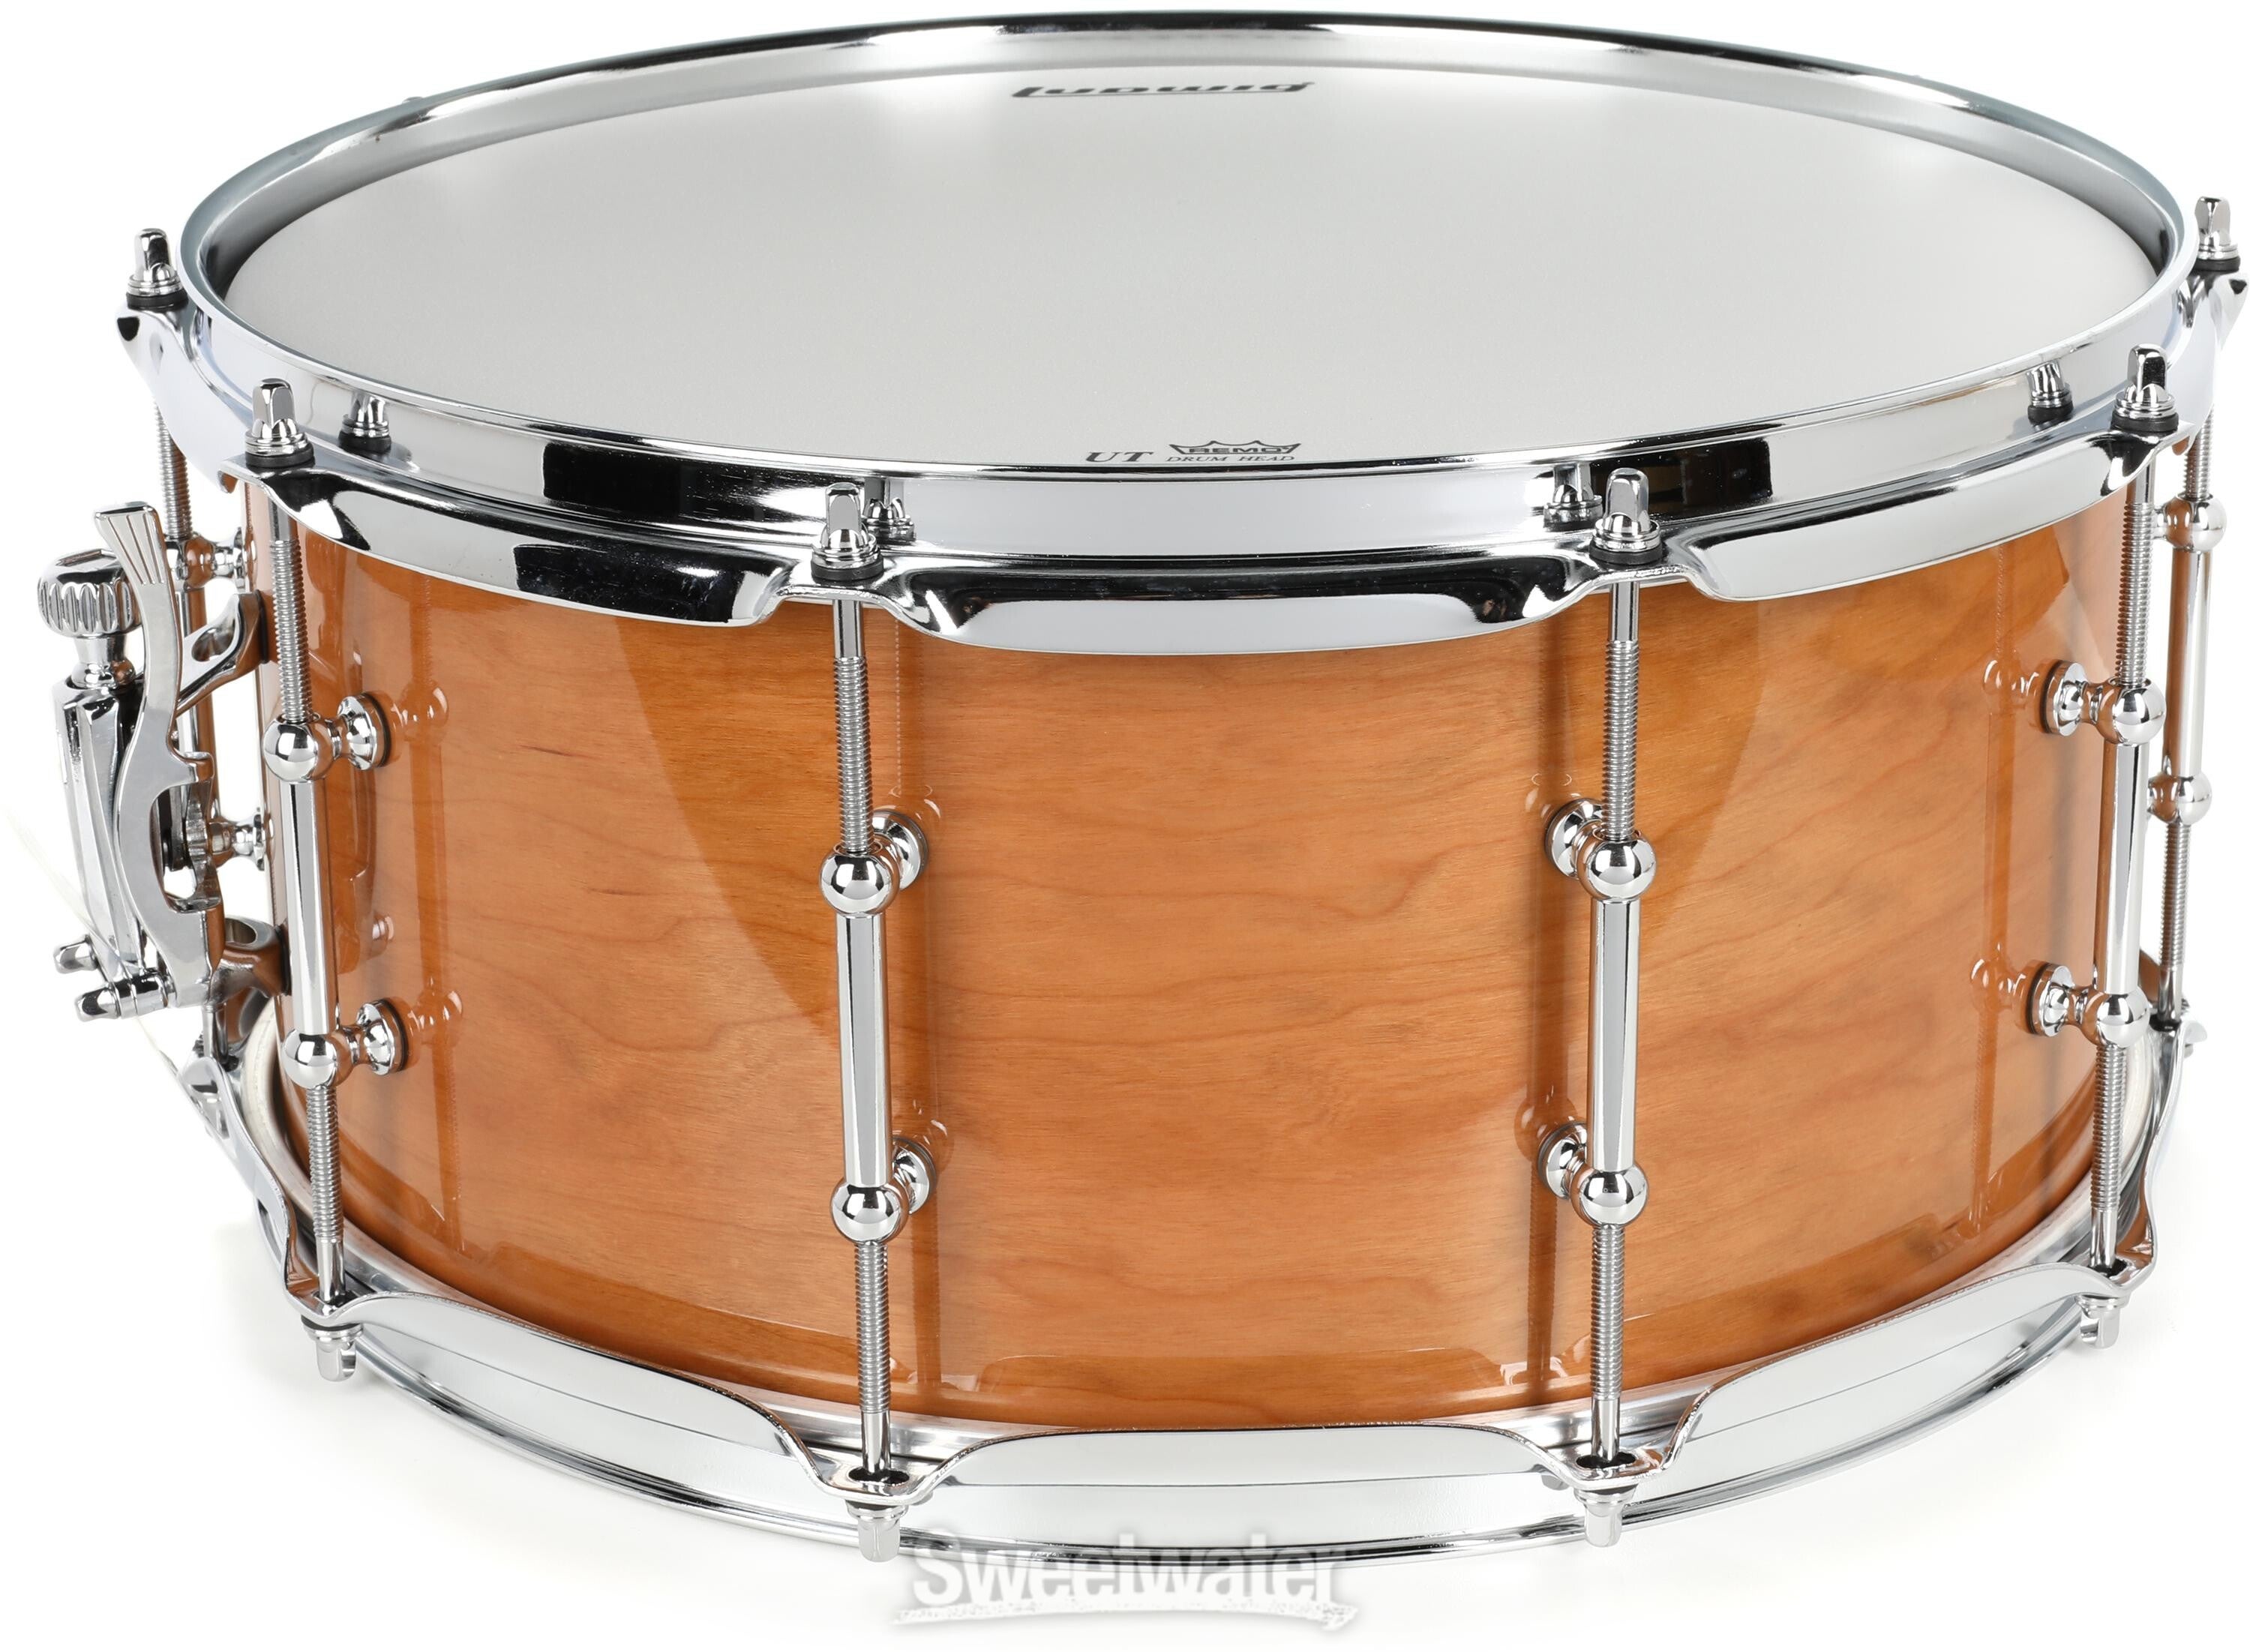 Universal Snare Drum - 6.5 x 14-inch - Natural Cherry - Sweetwater